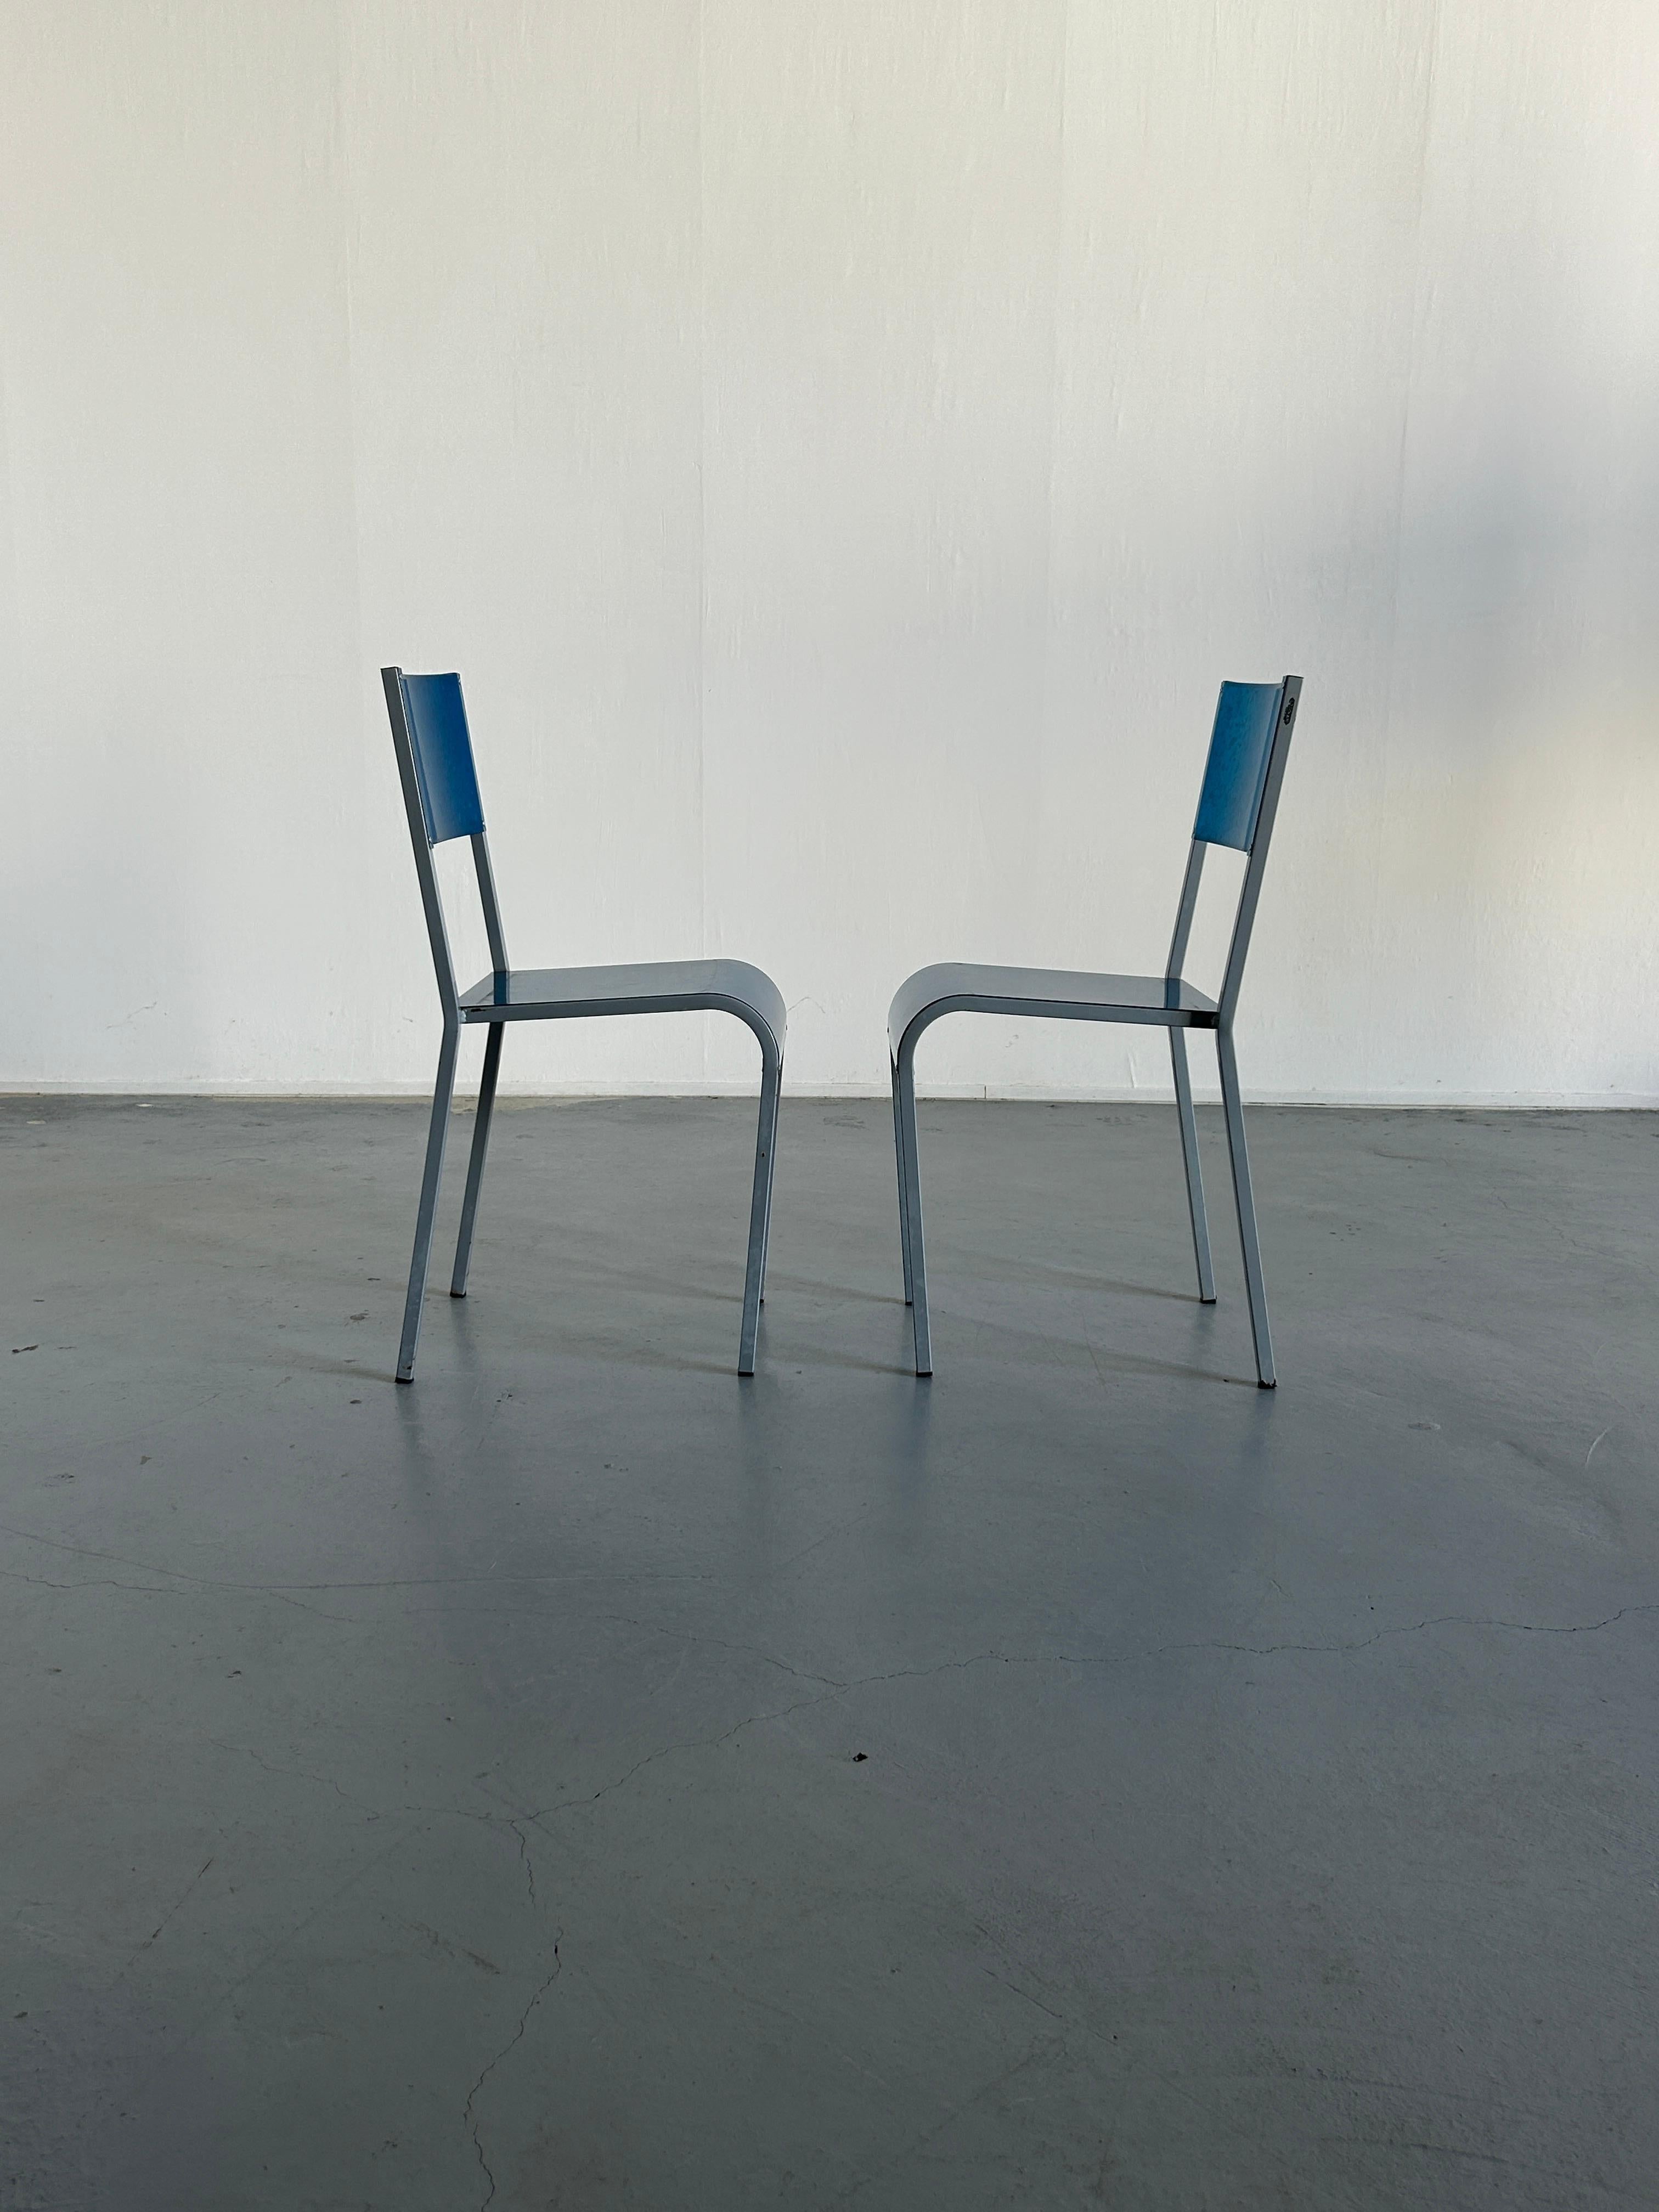 Pair of Blue Postmodern Industrial Metal Dining Chairs by Parisotto, 1980s Italy In Good Condition For Sale In Zagreb, HR